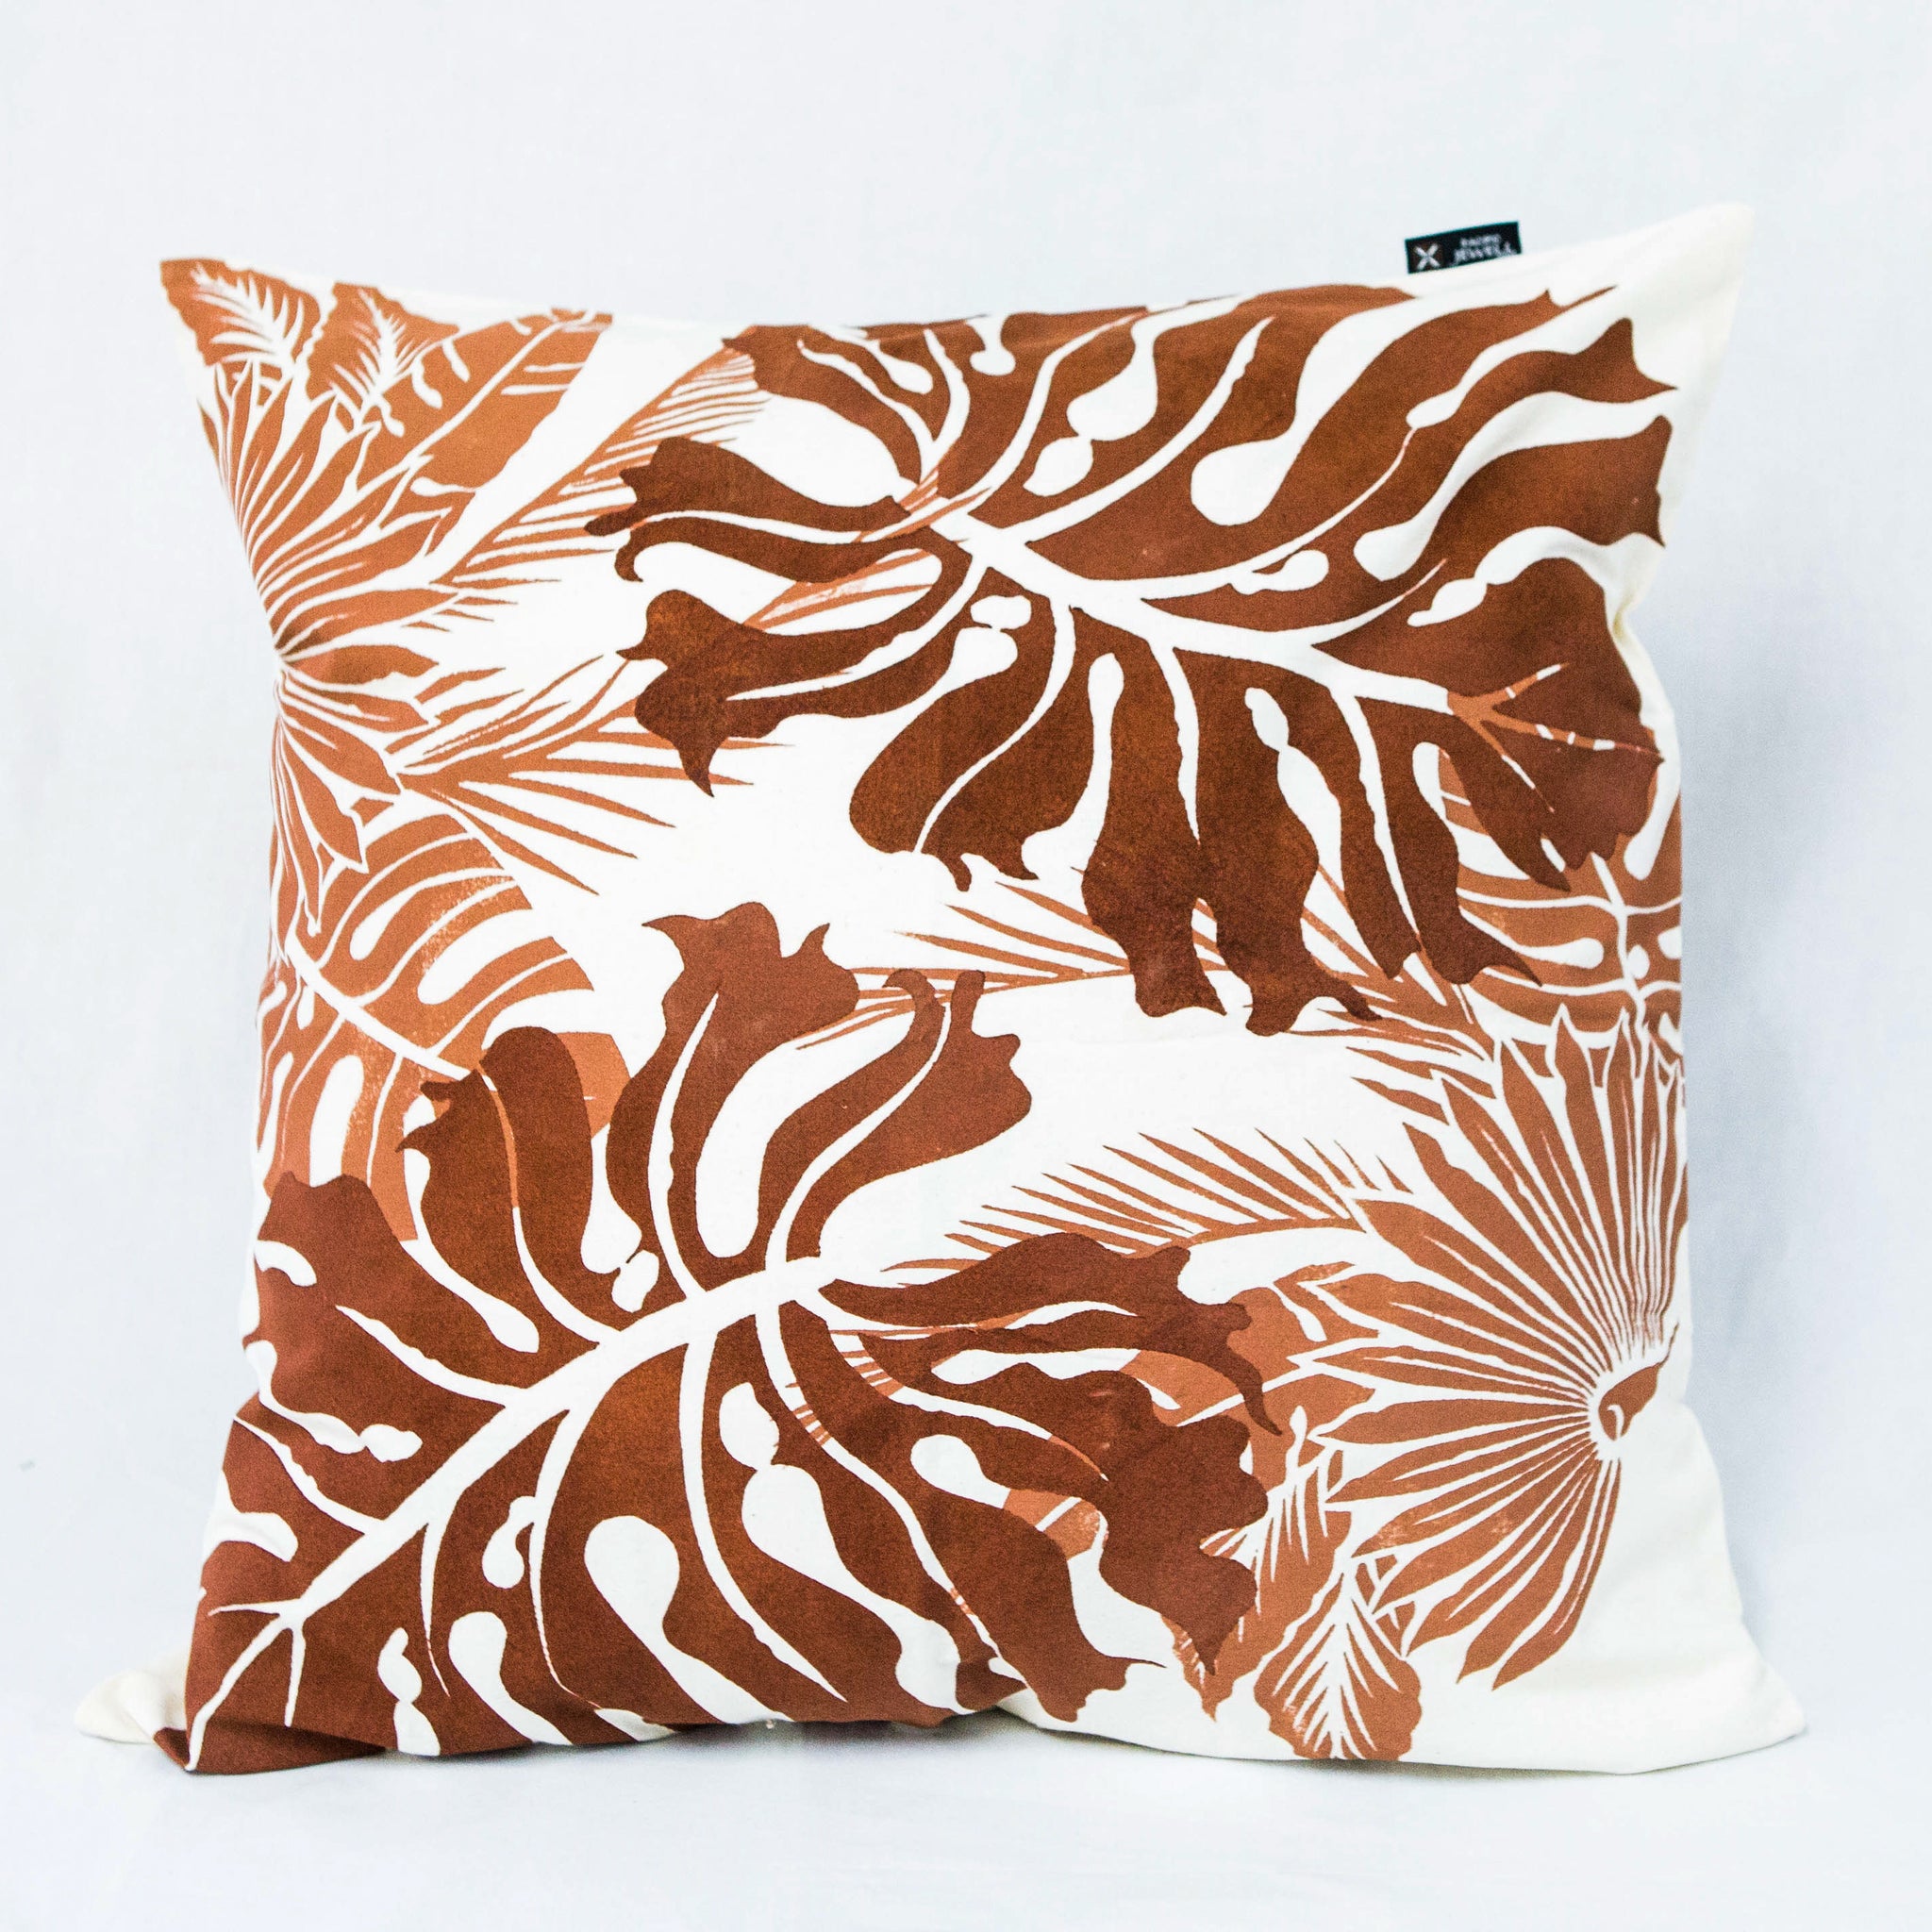 Cushion Cover "Local Leaves"